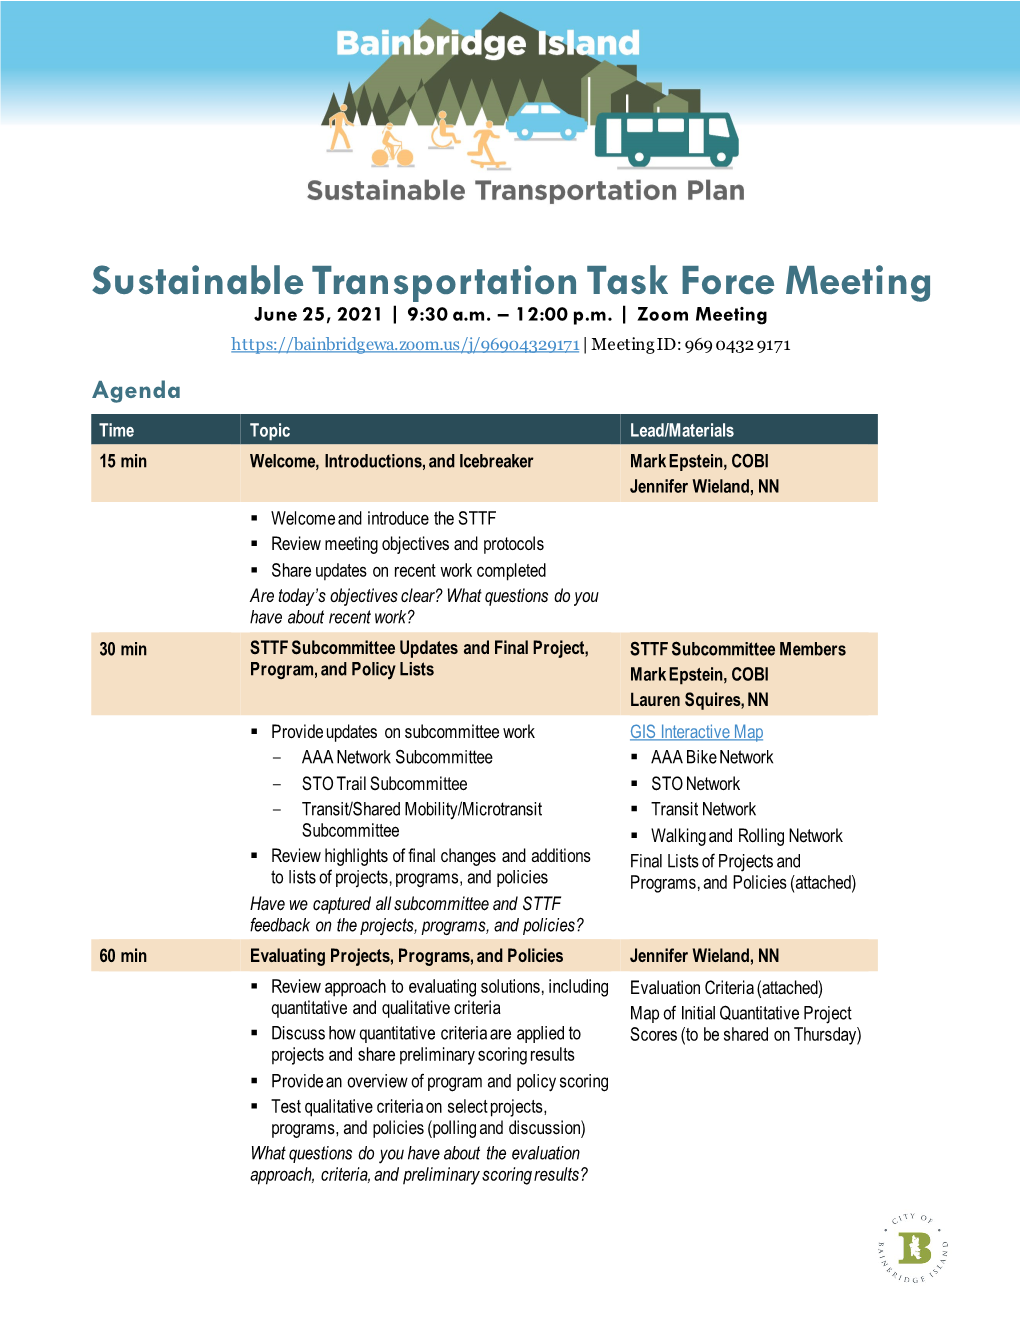 Sustainable Transportation Task Force Meeting June 25, 2021 | 9:30 A.M